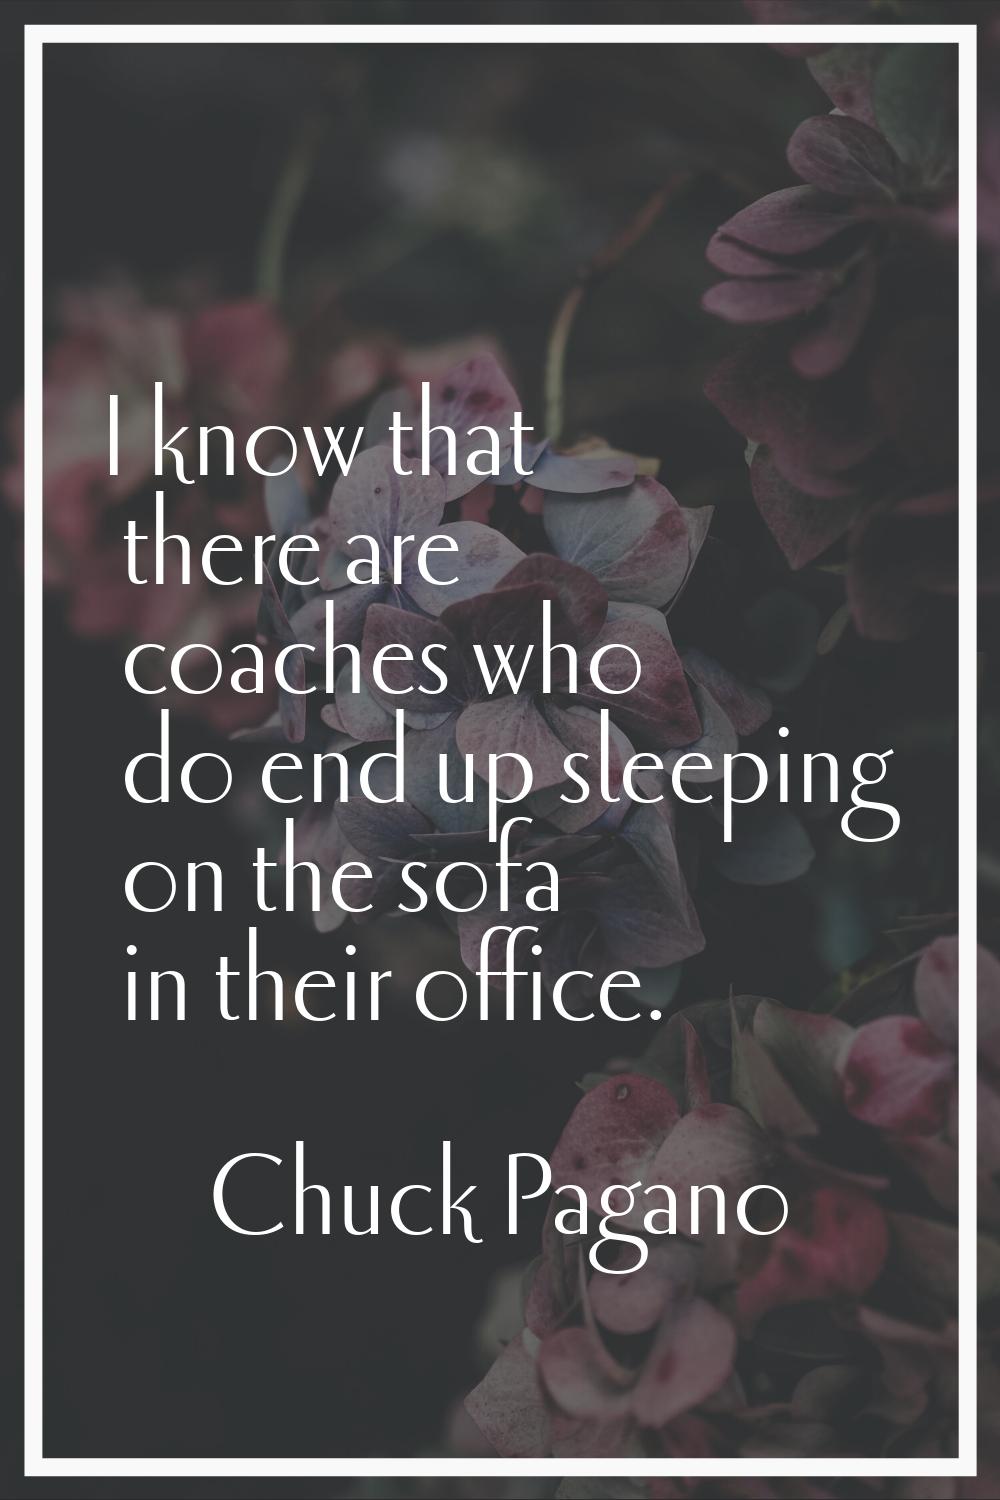 I know that there are coaches who do end up sleeping on the sofa in their office.